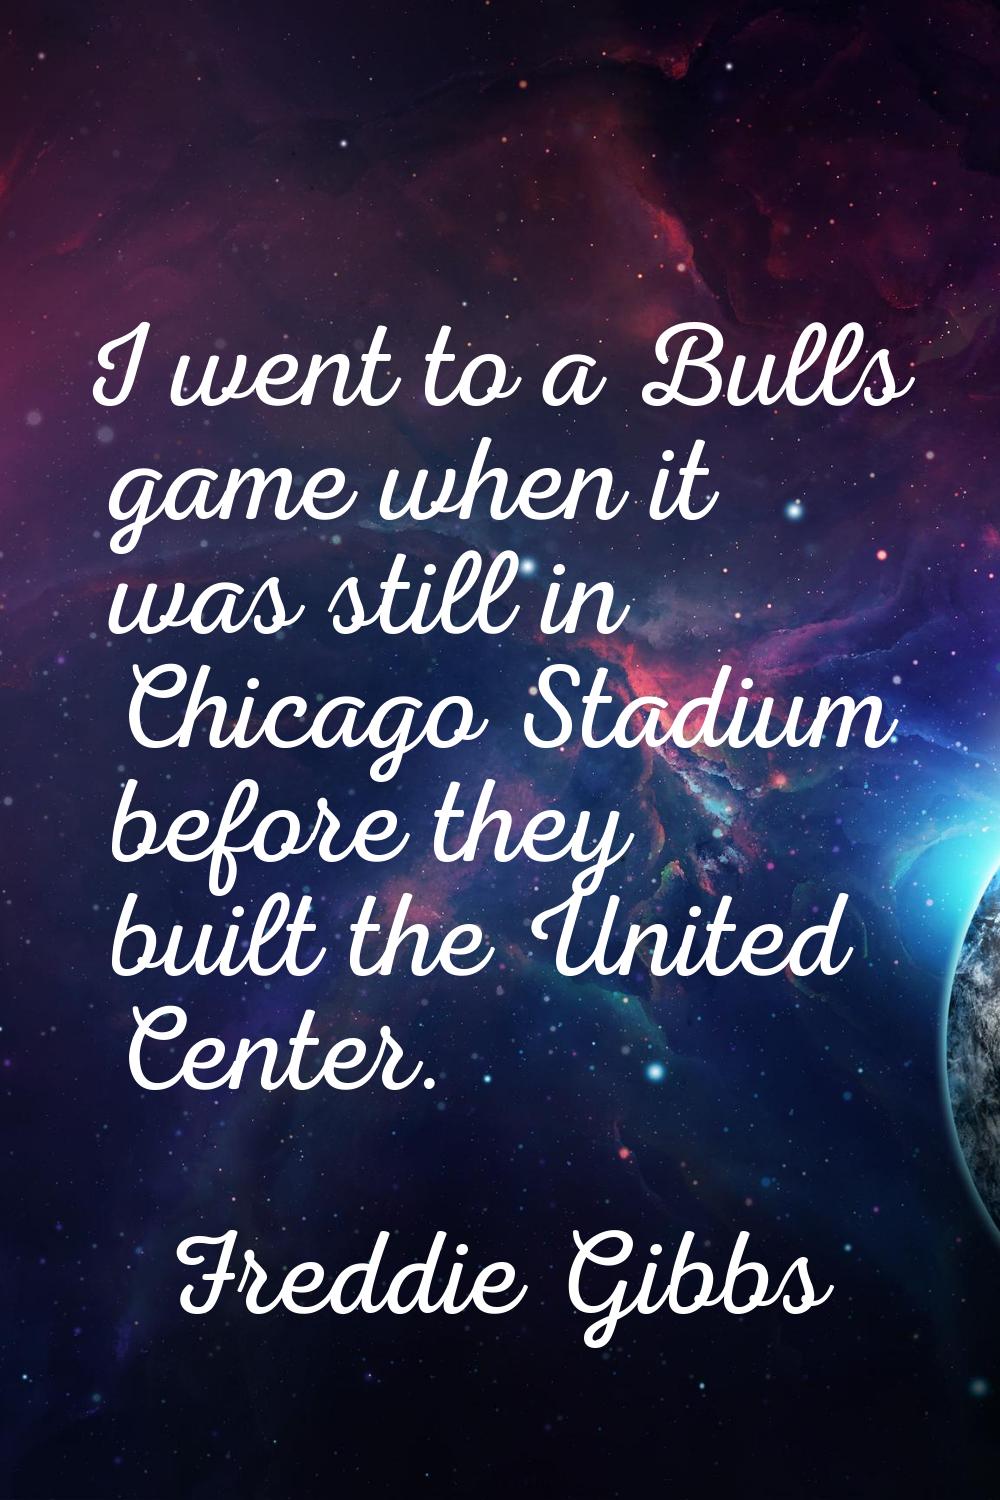 I went to a Bulls game when it was still in Chicago Stadium before they built the United Center.